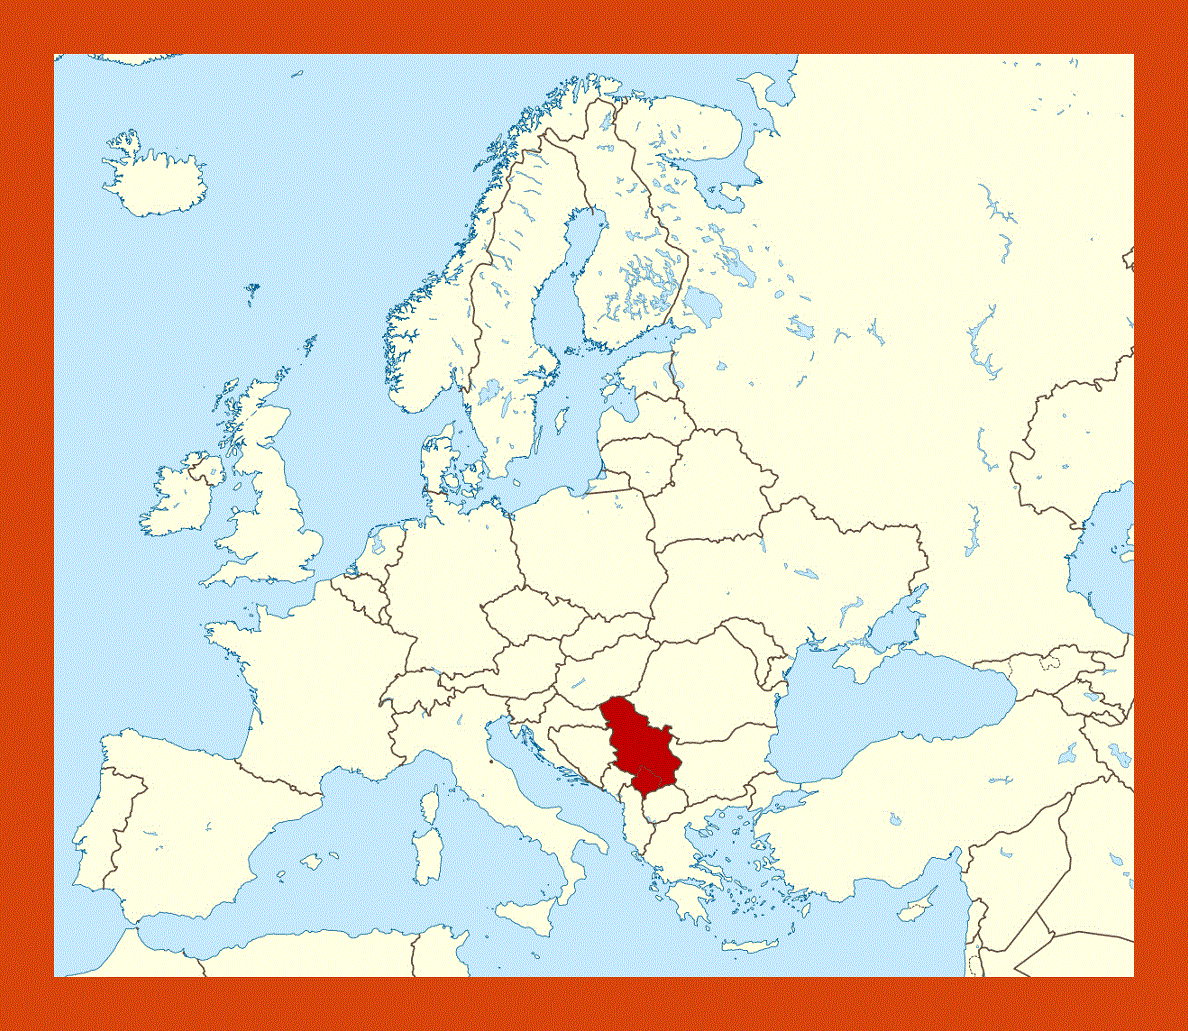 Location map of Serbia in Europe